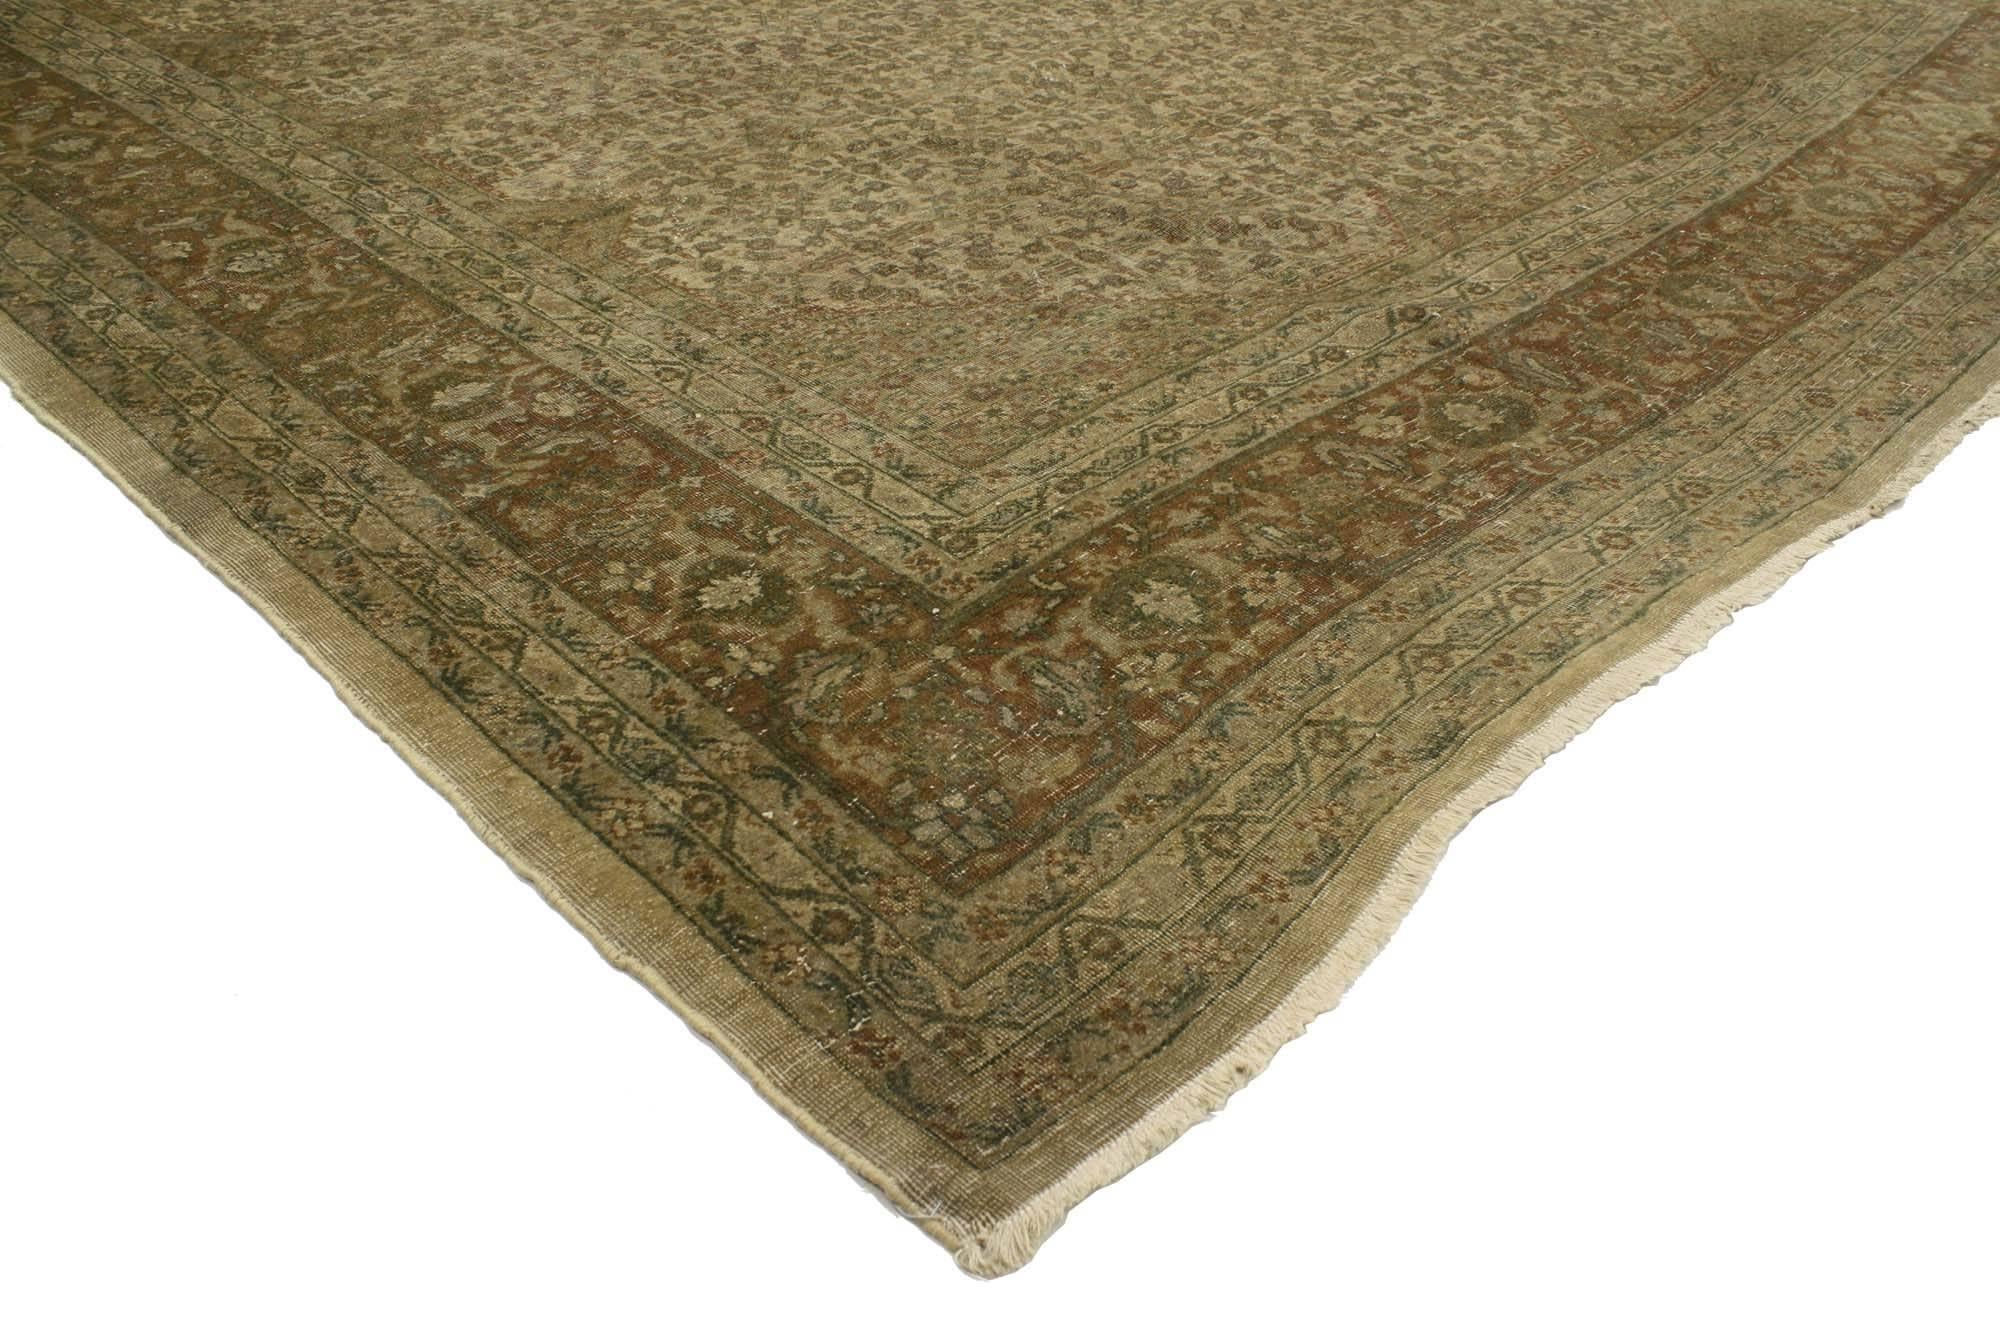 73097 Distressed Antique Persian Tabriz Rug with Modern Rustic English Style 09'08 x 13'09. With timeless elegance and nostalgic charm, this hand knotted wool distressed antique Persian Tabriz rug can beautifully blend modern, contemporary and